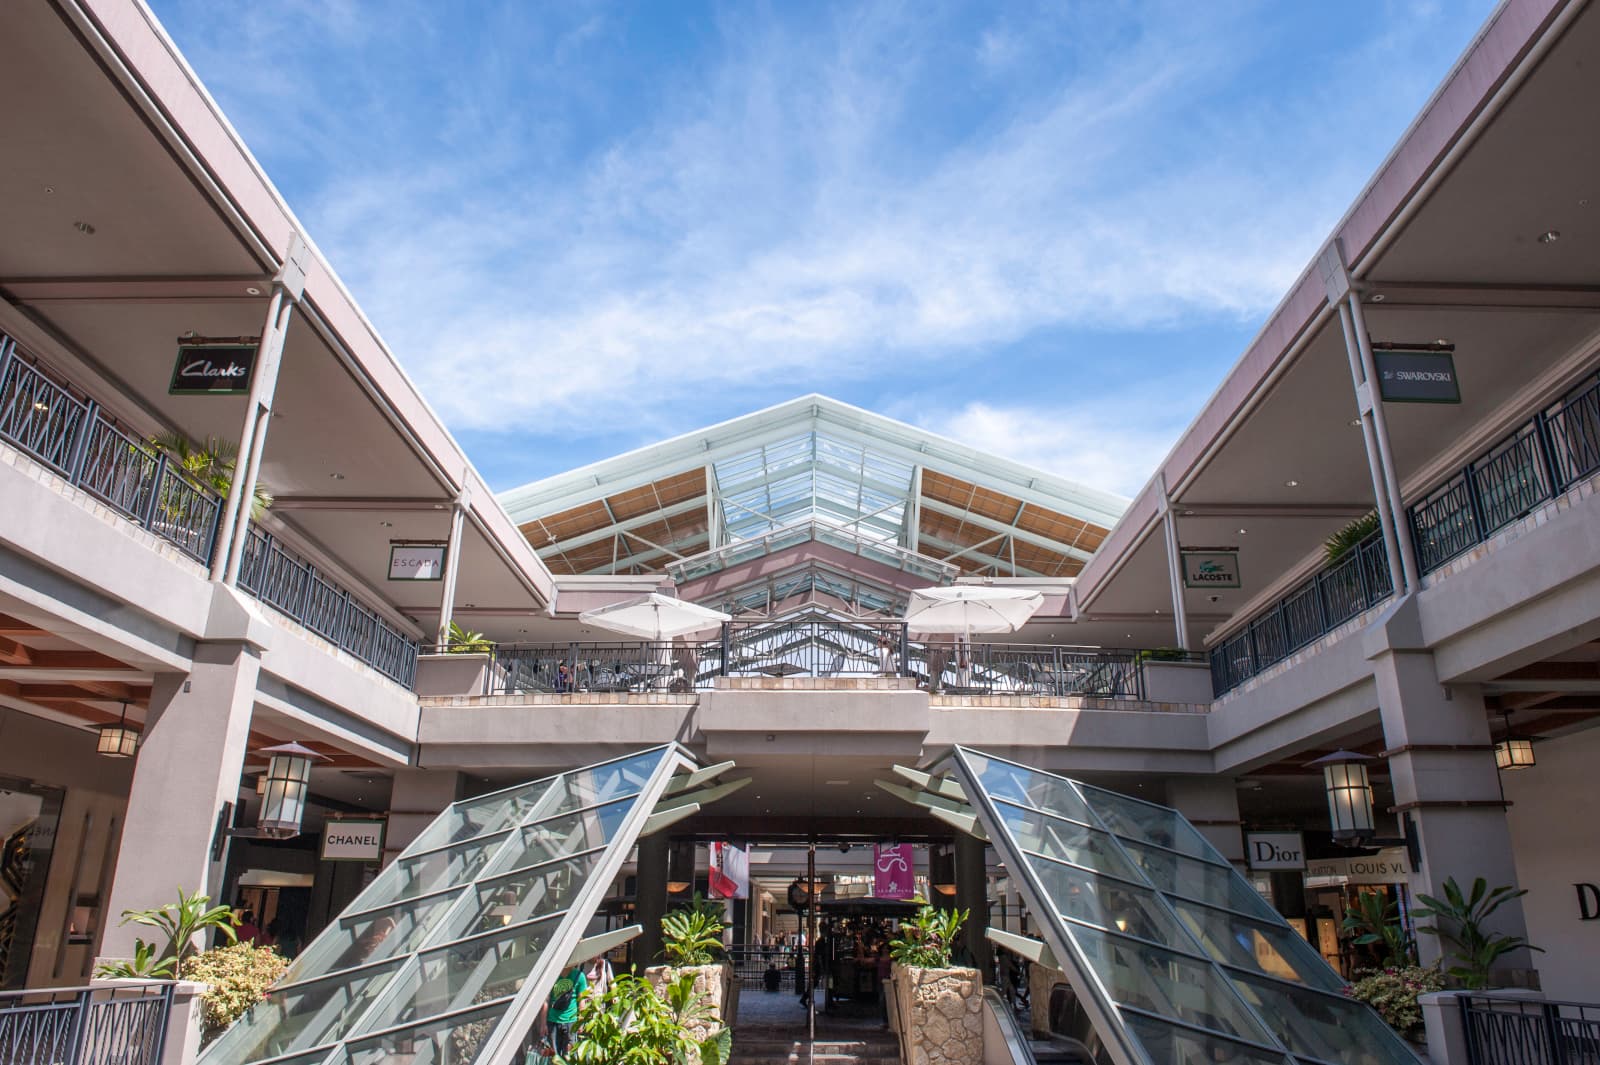 Photo from inside, showing the roof of the open-air Ala Moana Shopping Center